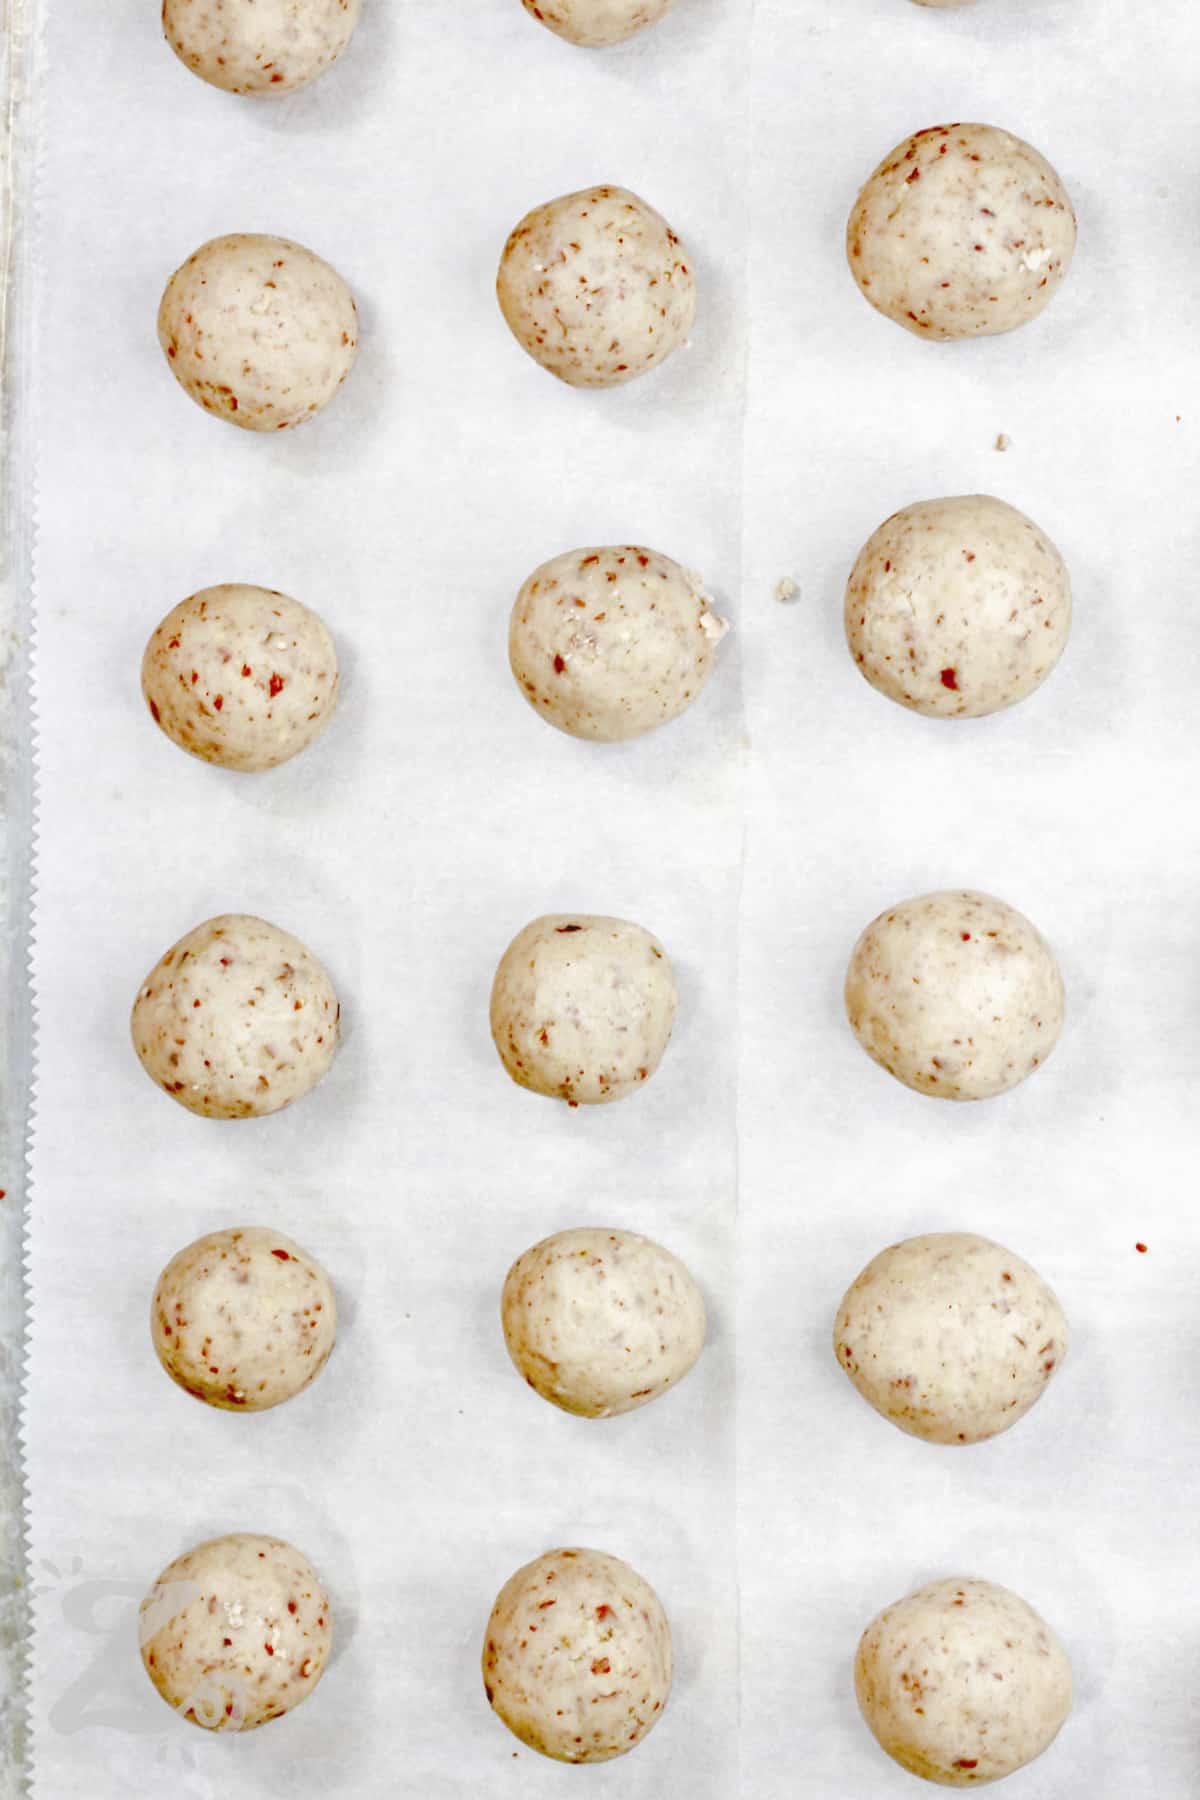 Pecan Snowball Cookies on a sheet pan before baking to make Pecan Snowball Cookies